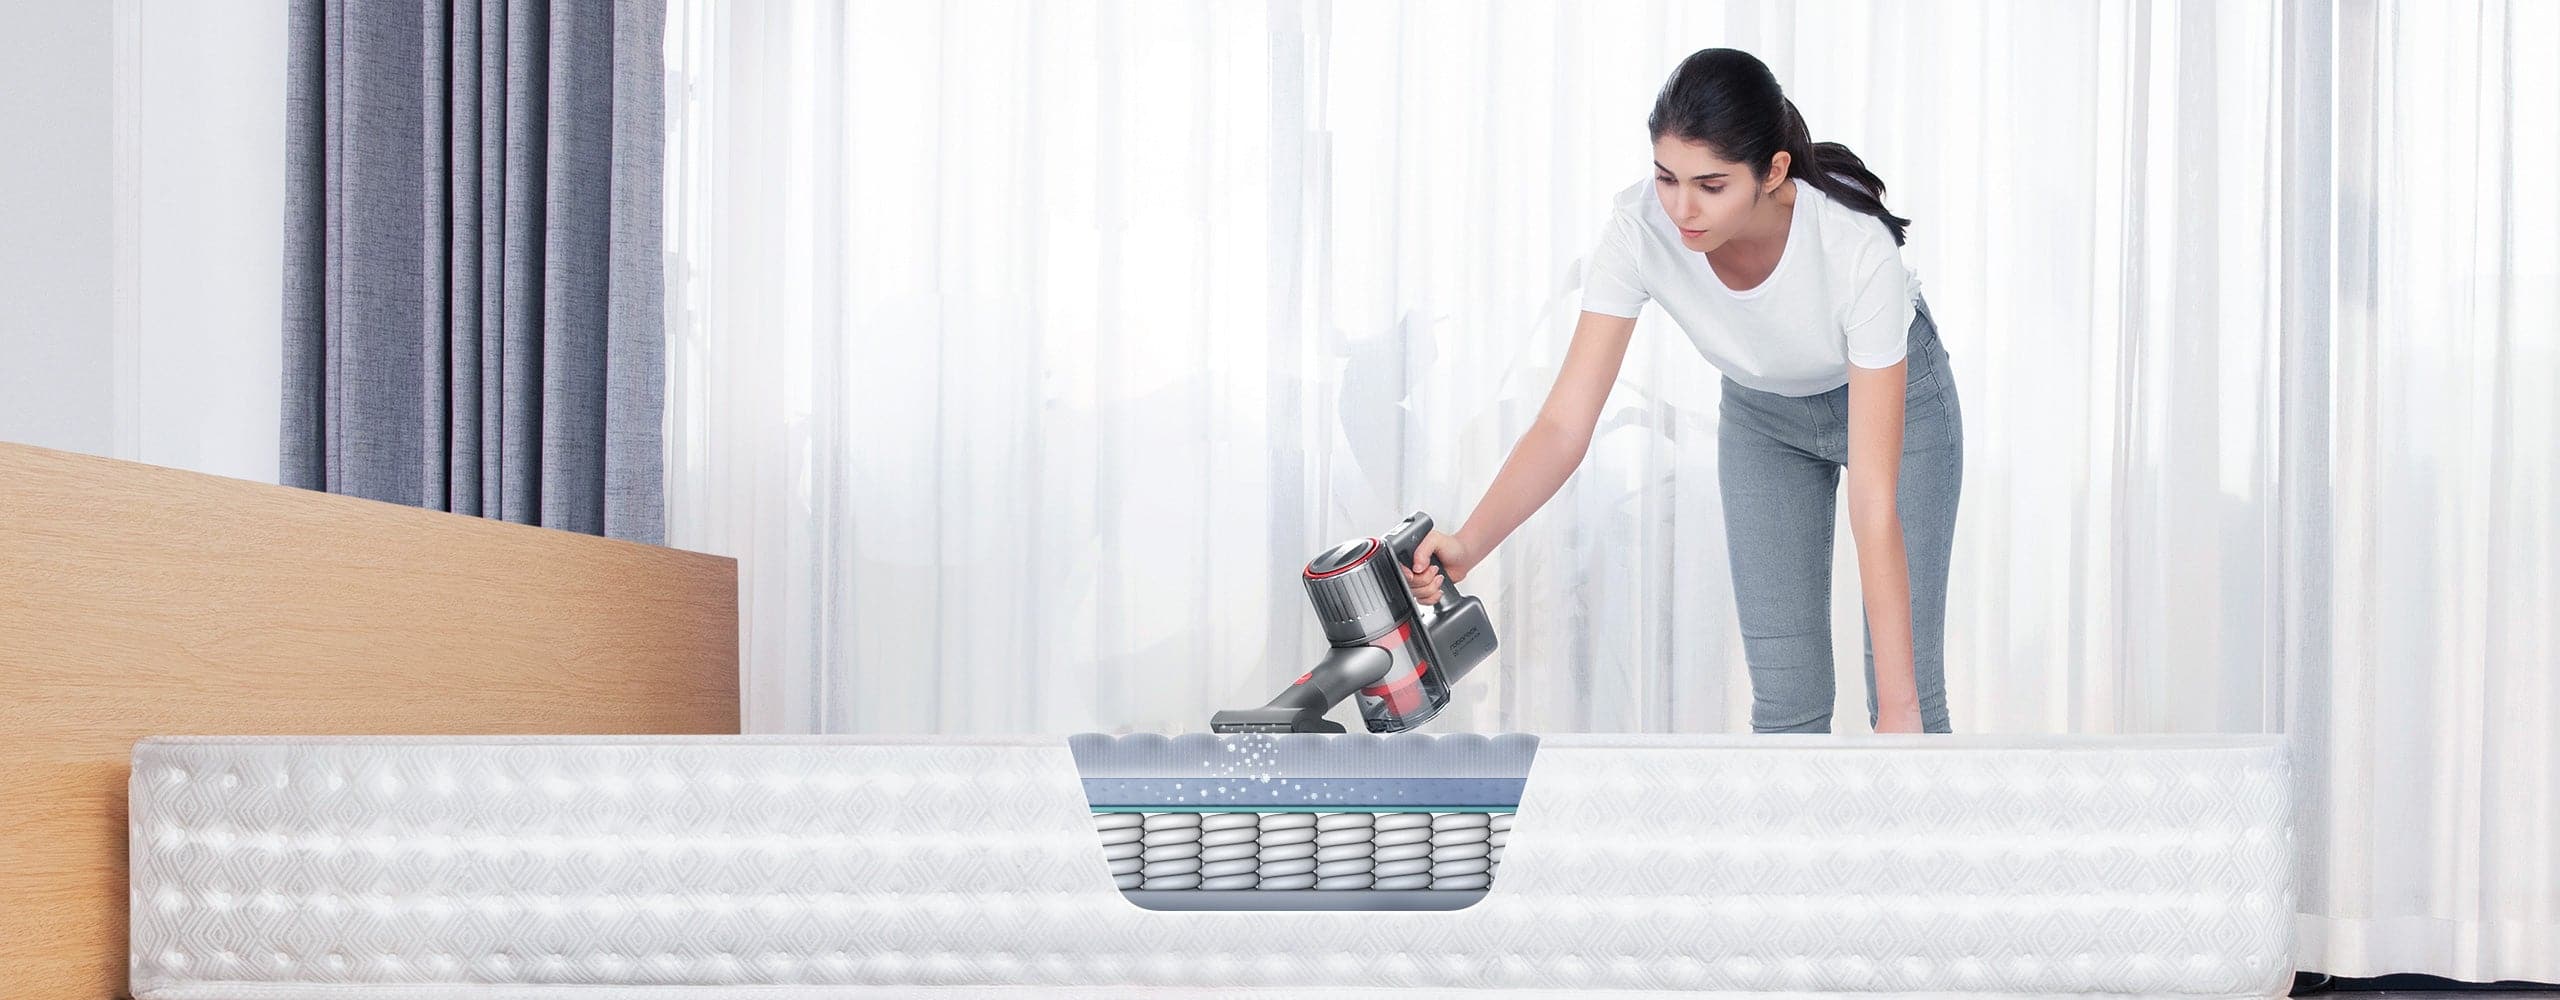 Roborock H6 creates maximum 150AW suction to deep clean carpets, beds, and car upholstery